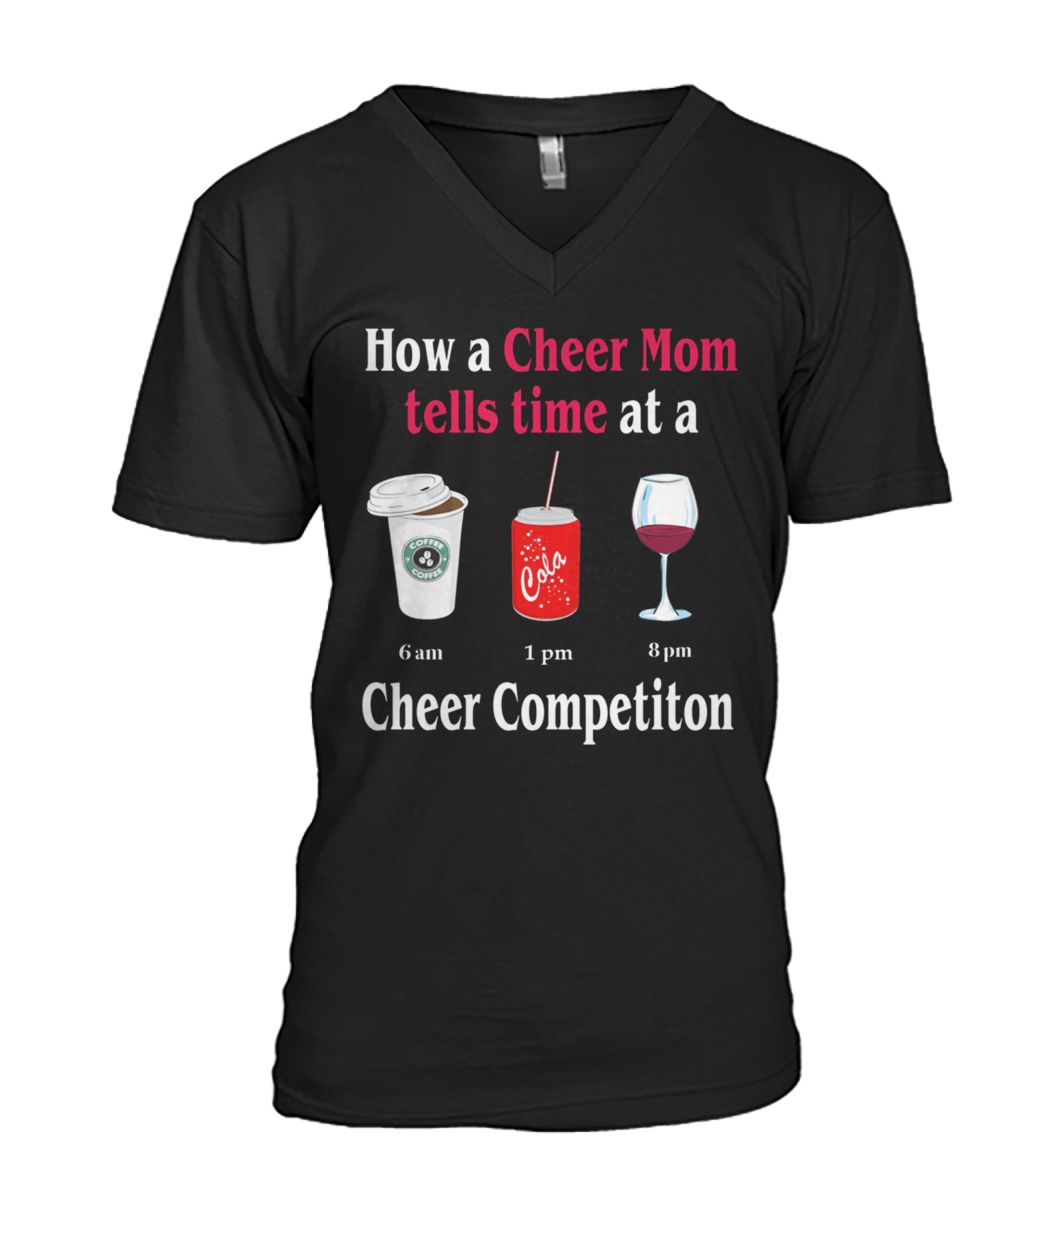 How a cheer mom tells time at a cheer competition mens v-neck